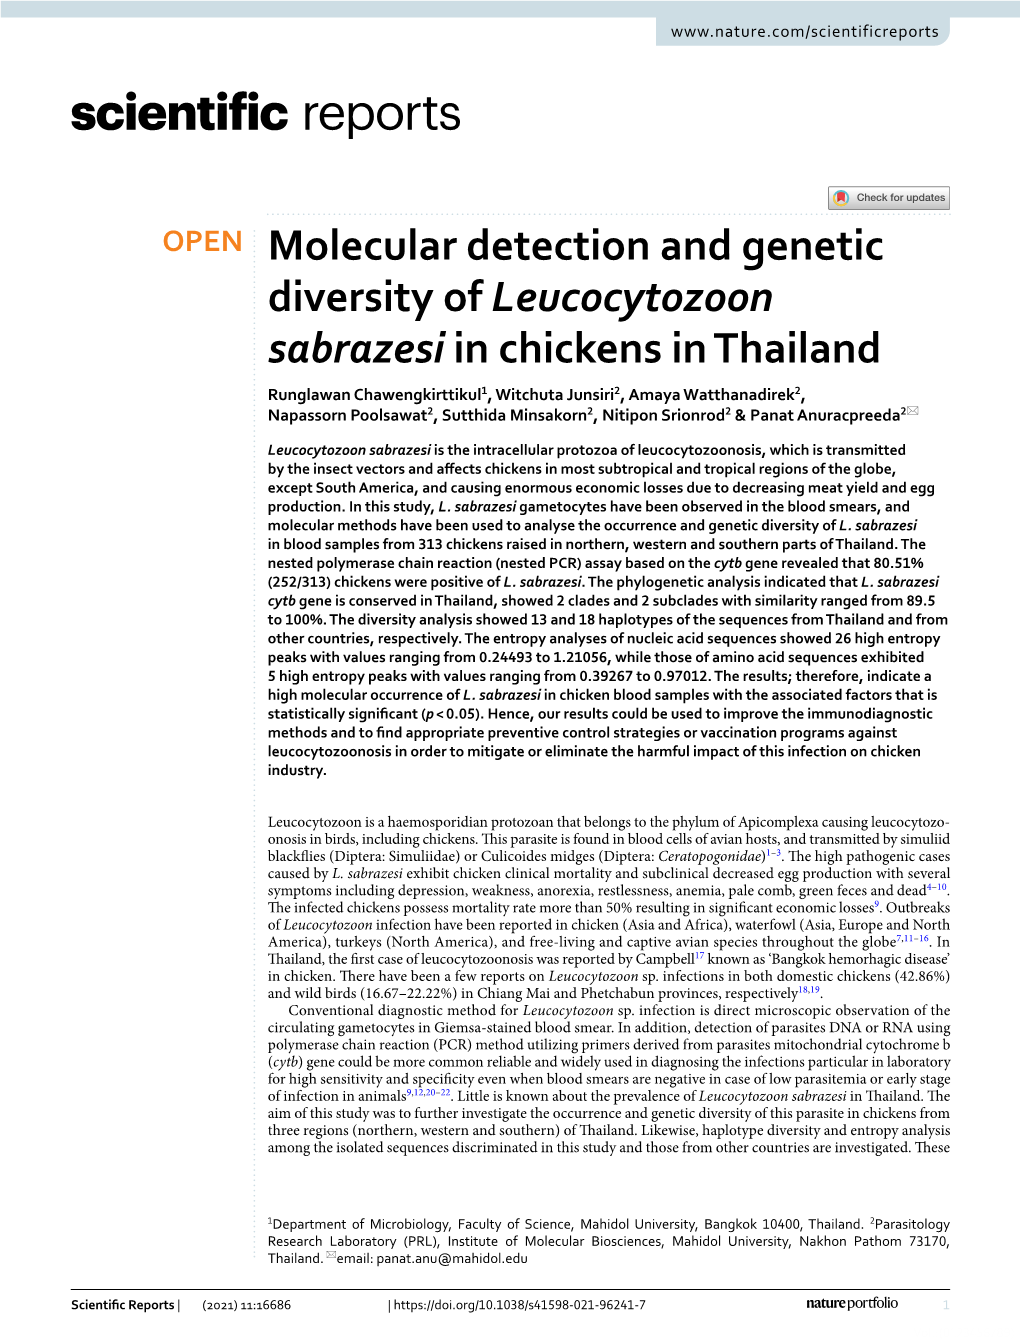 Molecular Detection and Genetic Diversity of Leucocytozoon